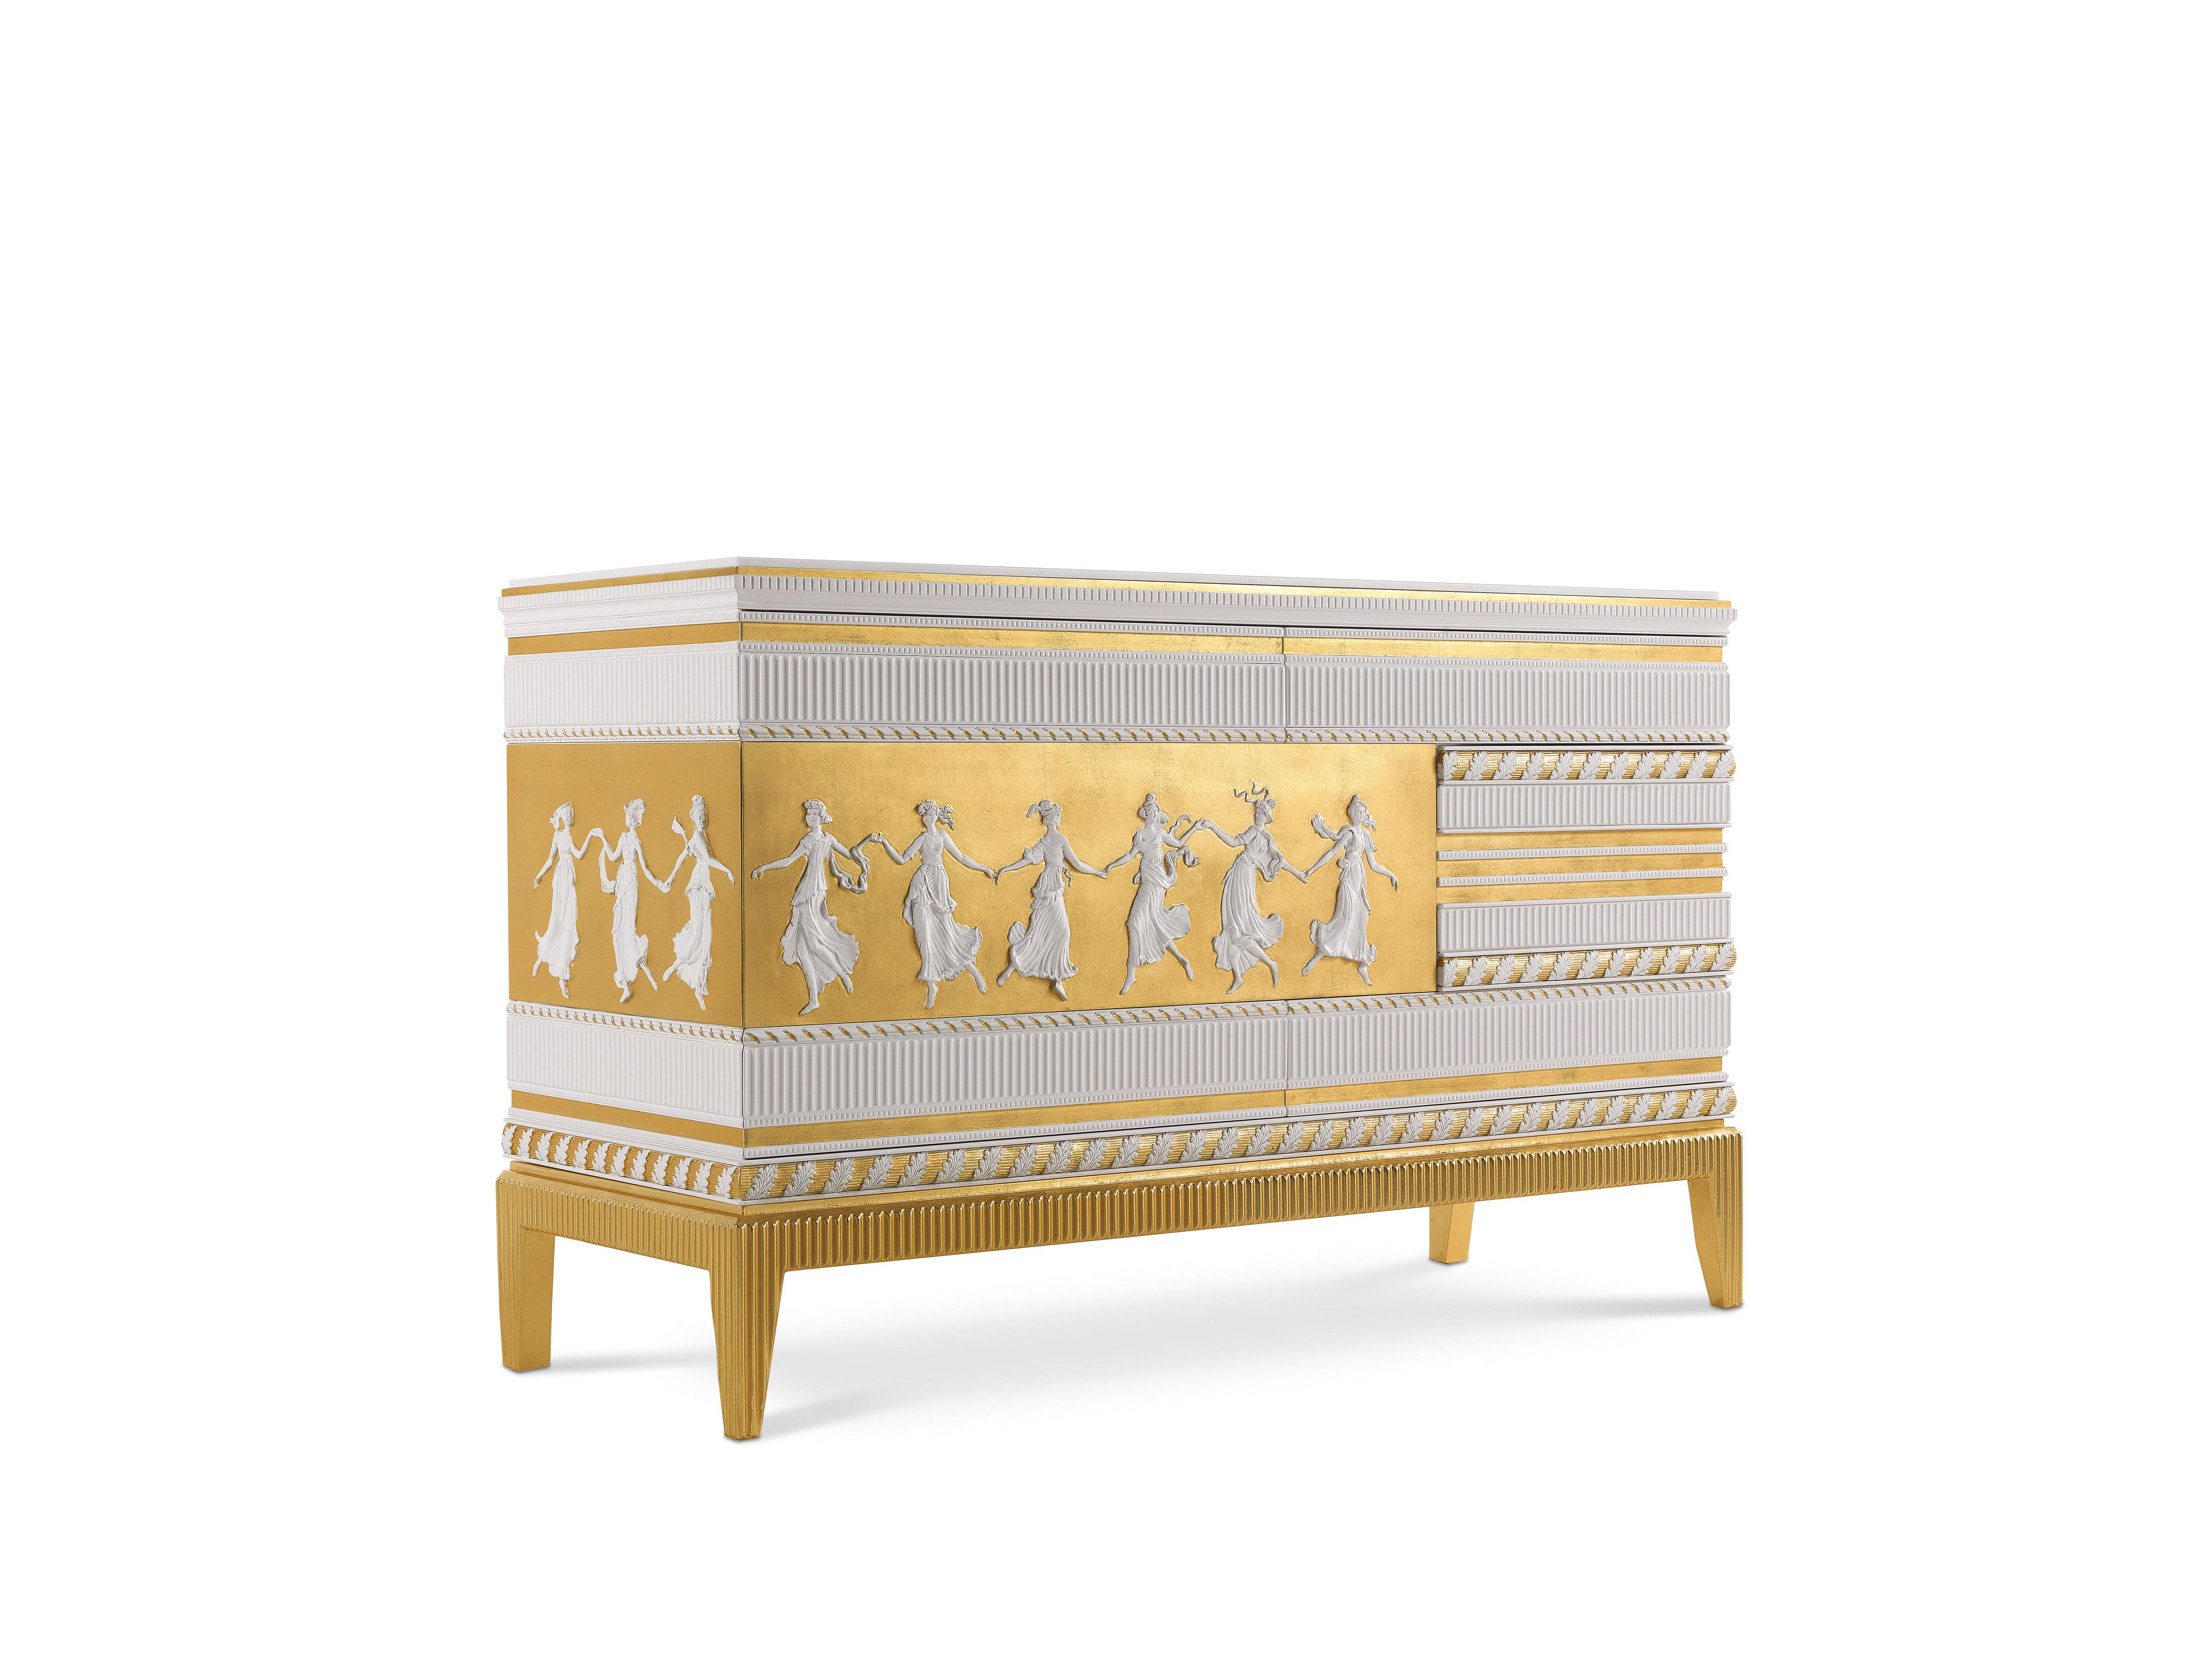 Portland is a delicate and refined line of furnishings, characterized by decorations that recall the world of Wedgwood ceramics. The ornaments with a classic charm are further enhanced by the lacquer finish with a biscuit porcelain effect which